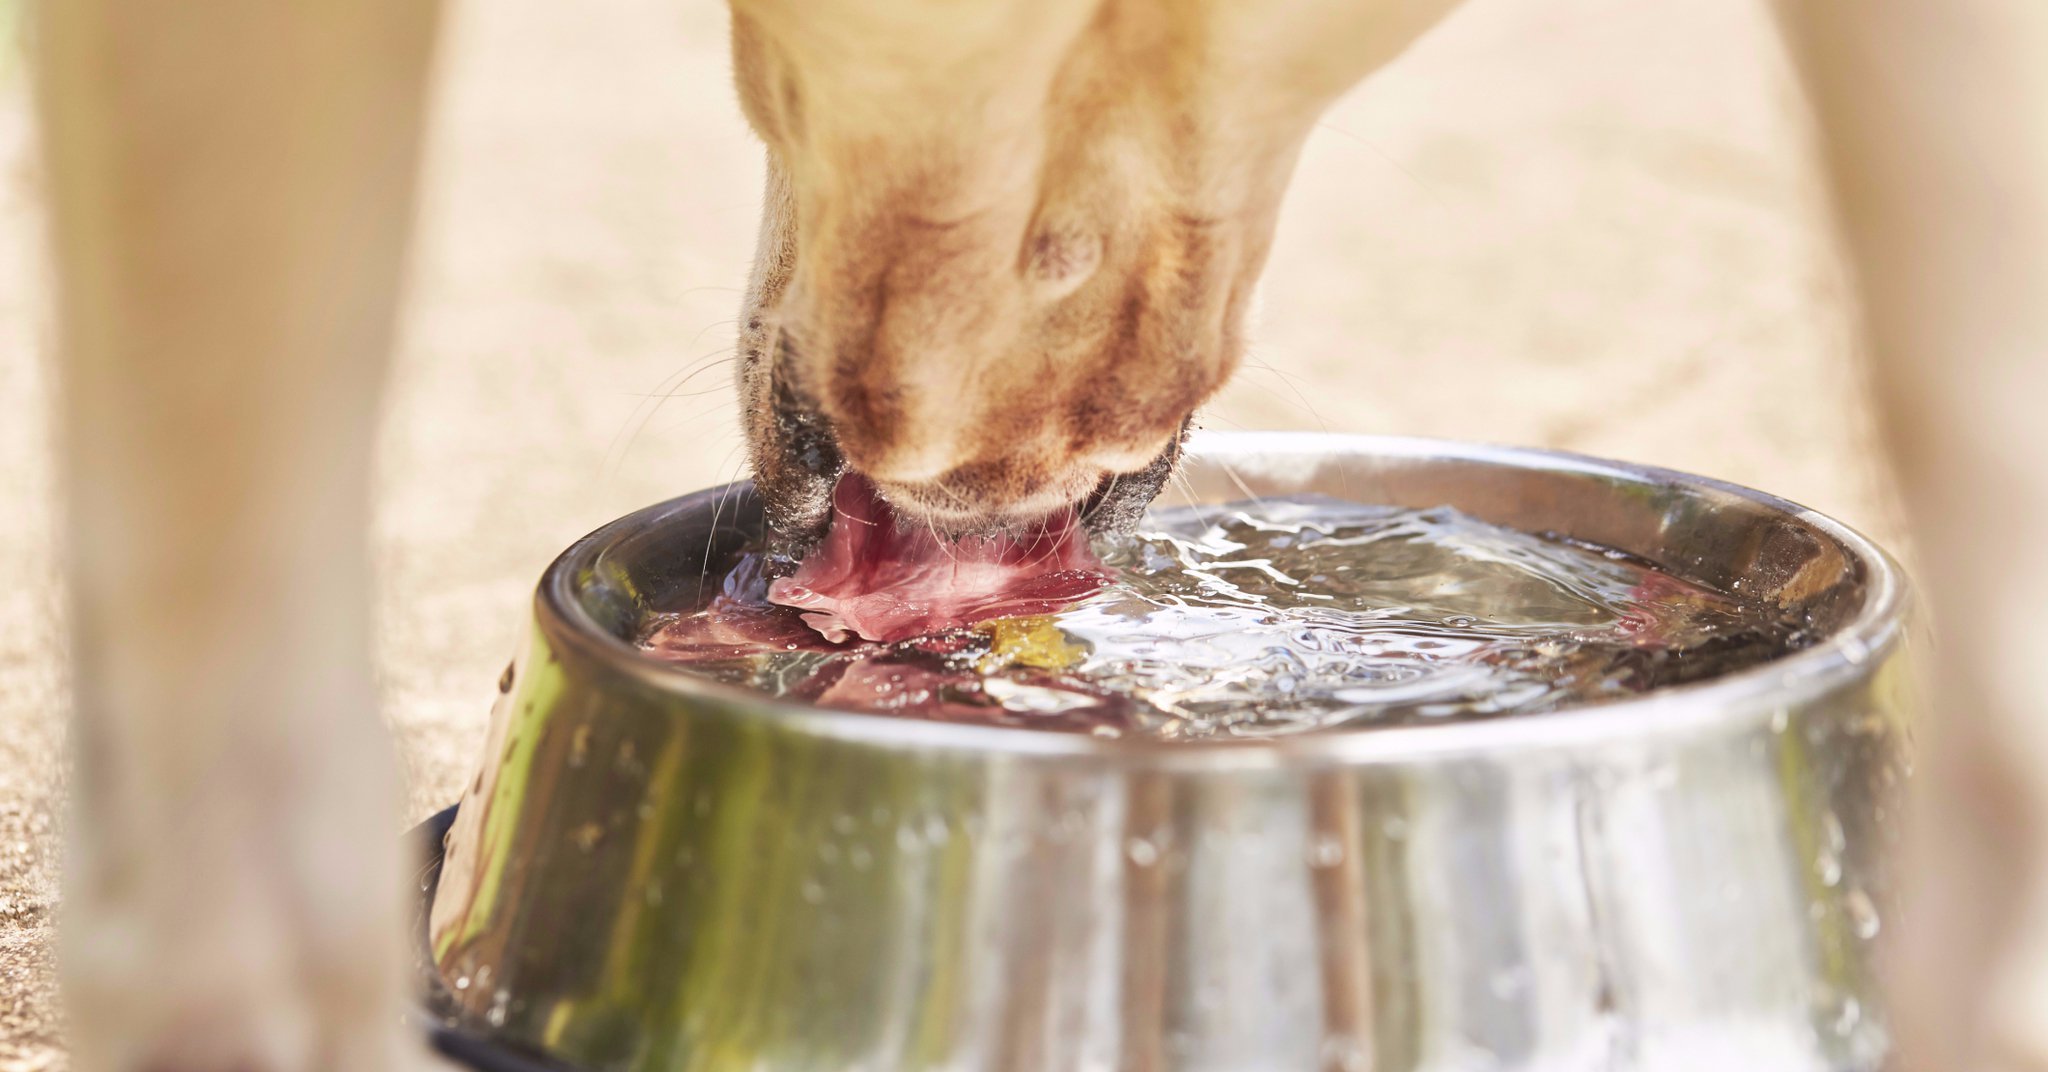 Dogs should always have access to fresh – but not too cold – water